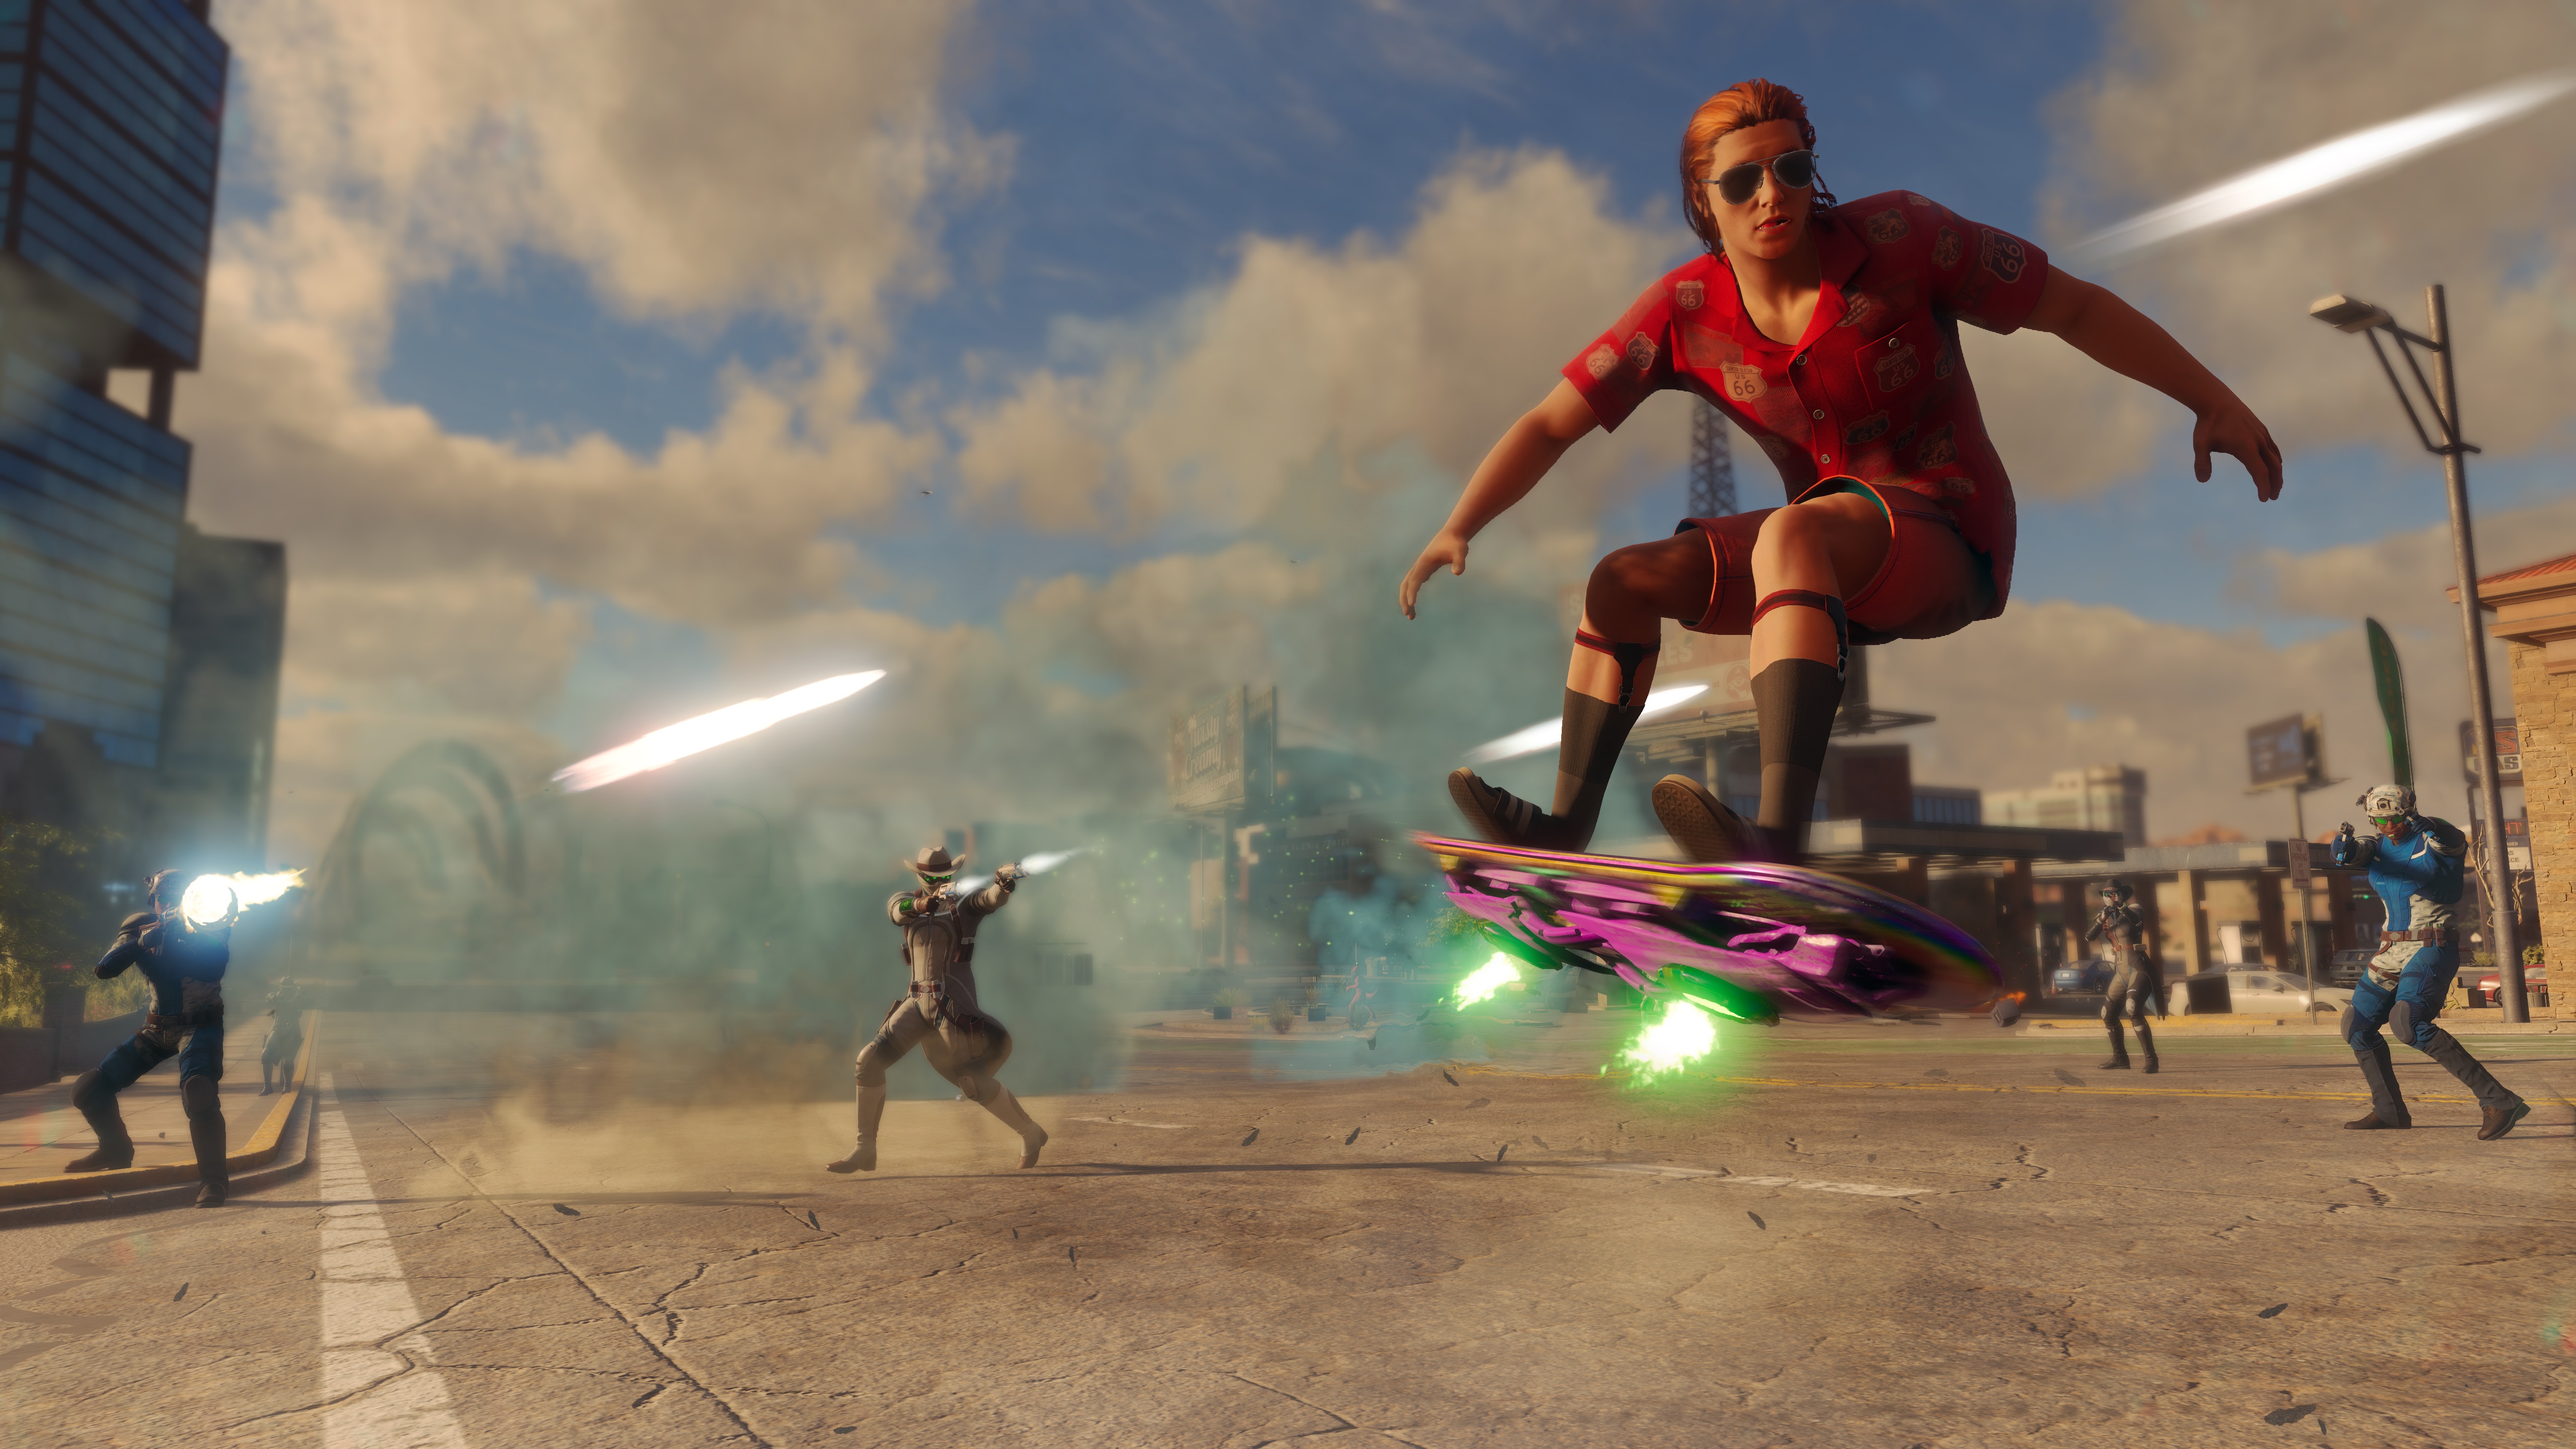 Saints Row (2022) Game Review